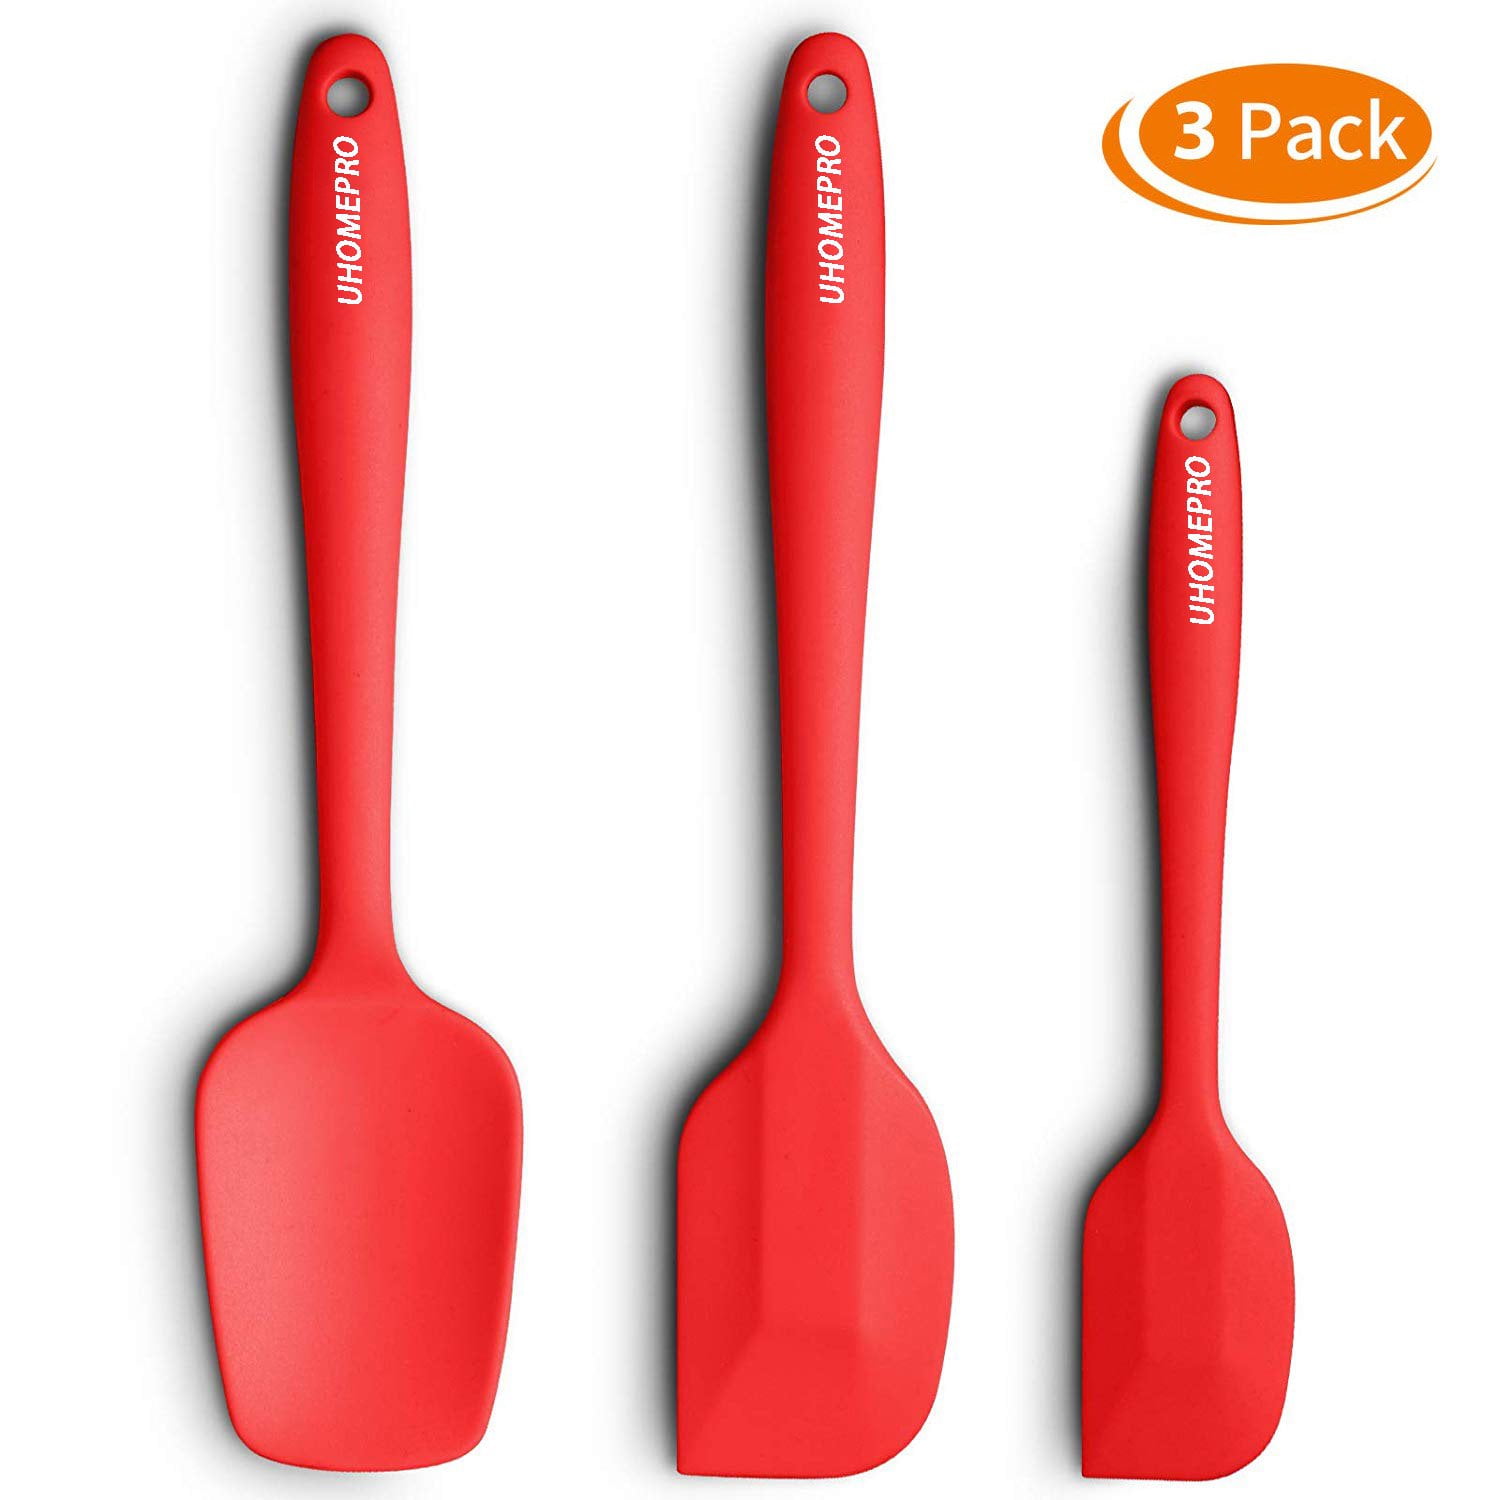 3 Pack Large Silicone Spatula for Kitchen,600°F Heat resistant Rubber  Spatulas for Baking,Cooking, S…See more 3 Pack Large Silicone Spatula for